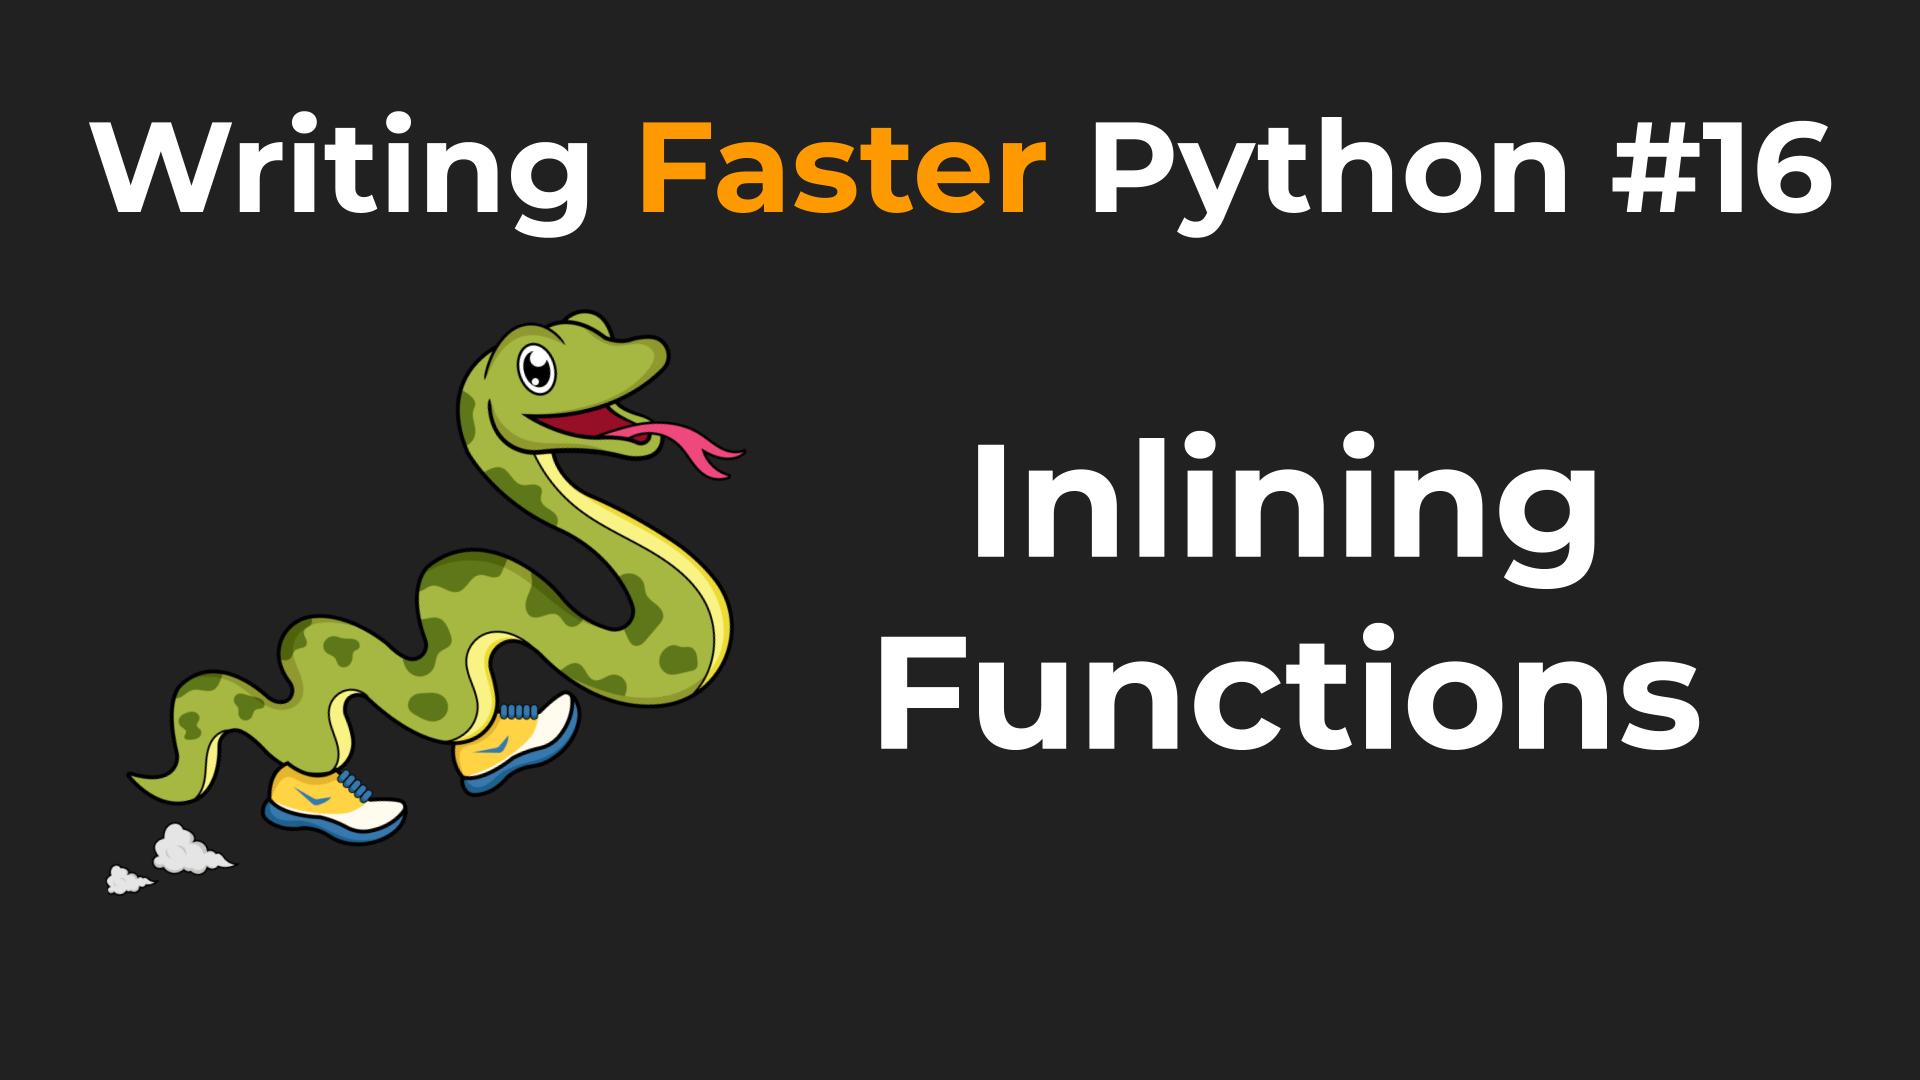 Inlining Functions